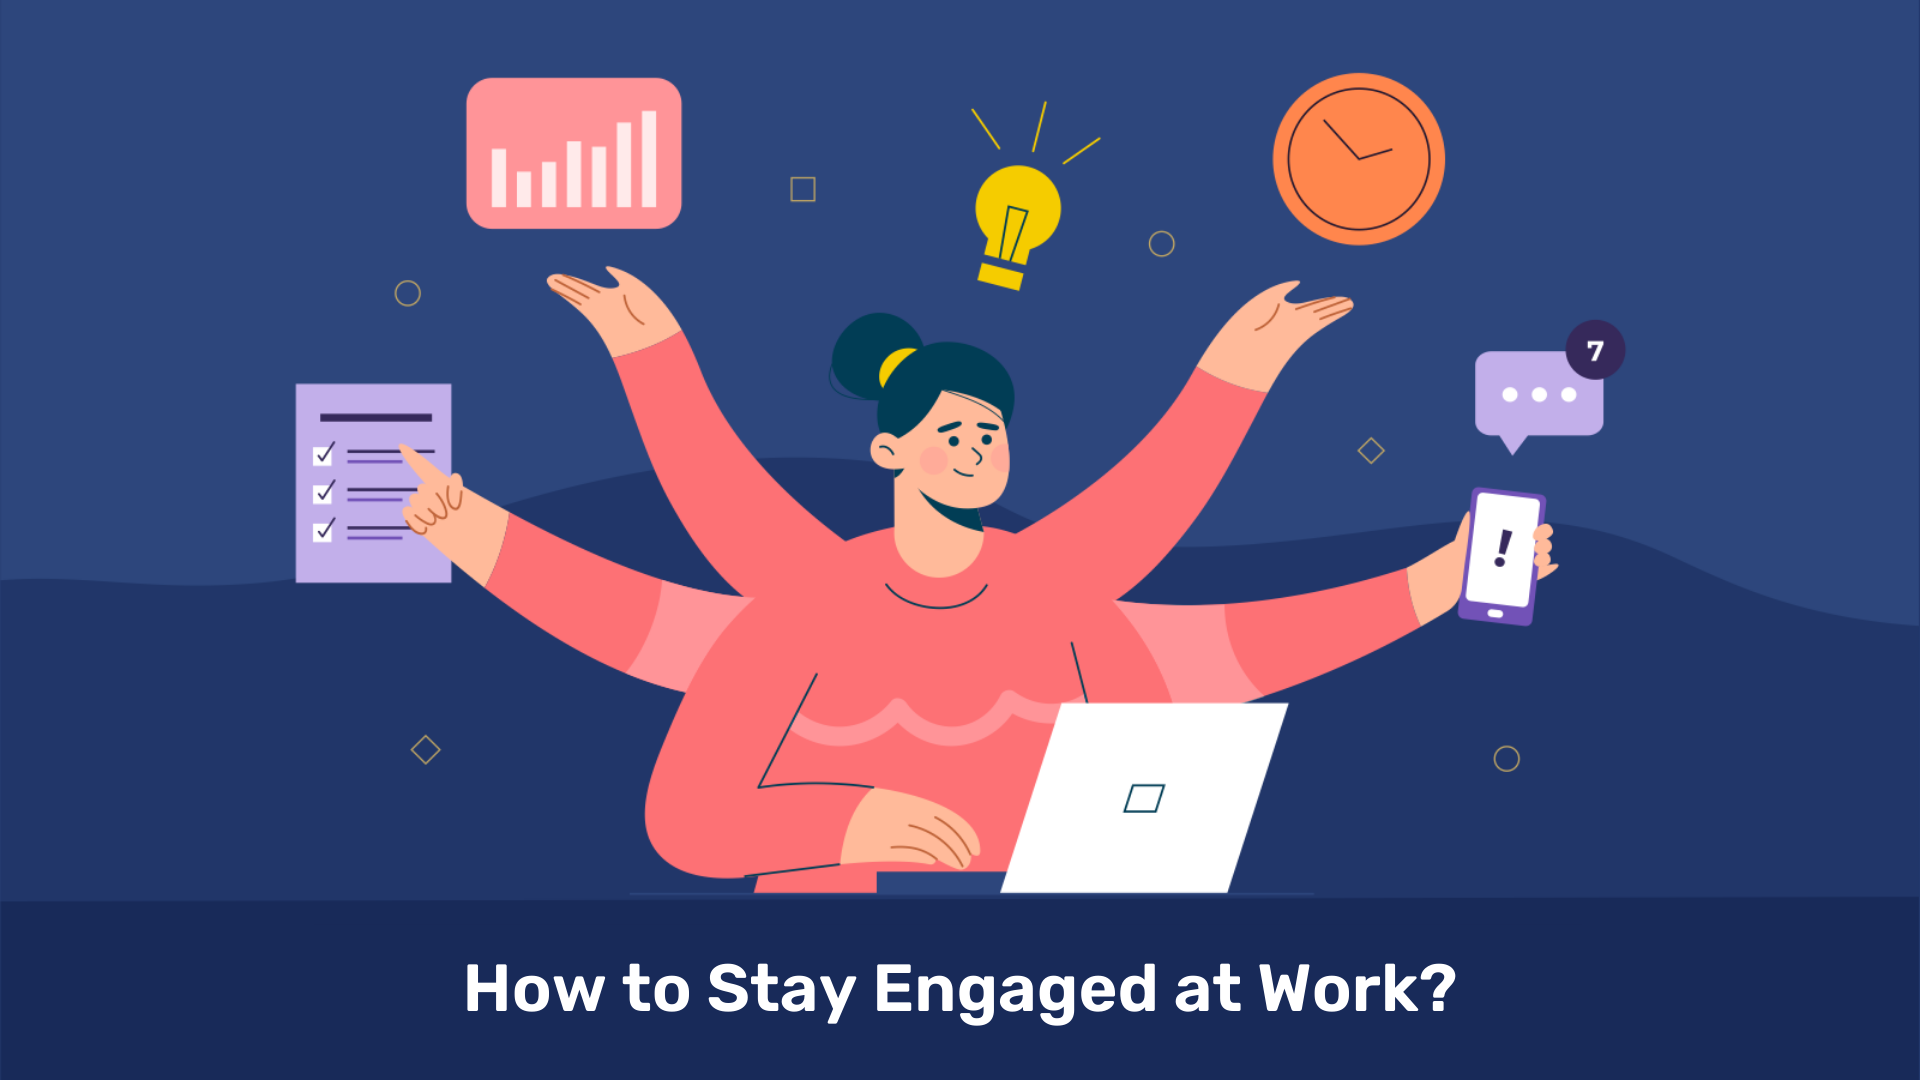 How to stay engaged at work